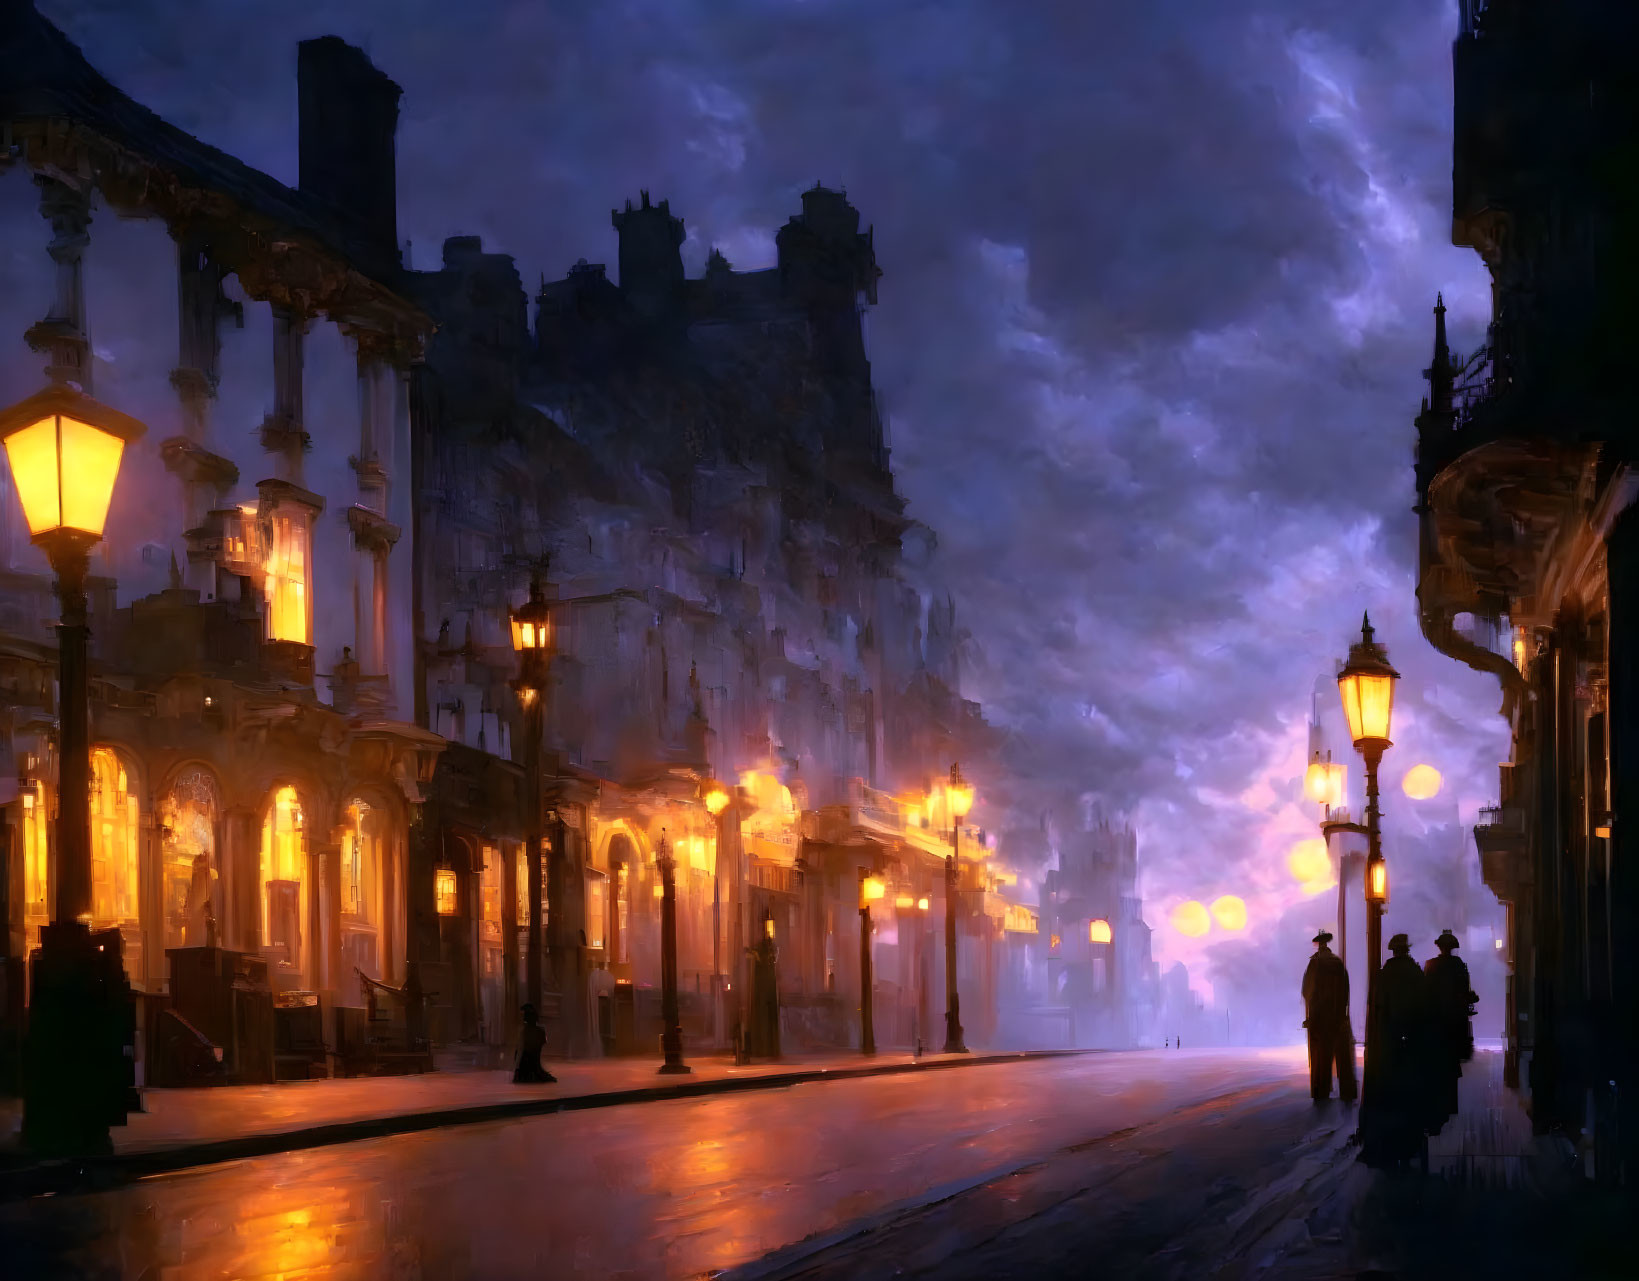 Mystical evening scene: cobbled street, glowing lamps, shadowed figures, vintage architecture.